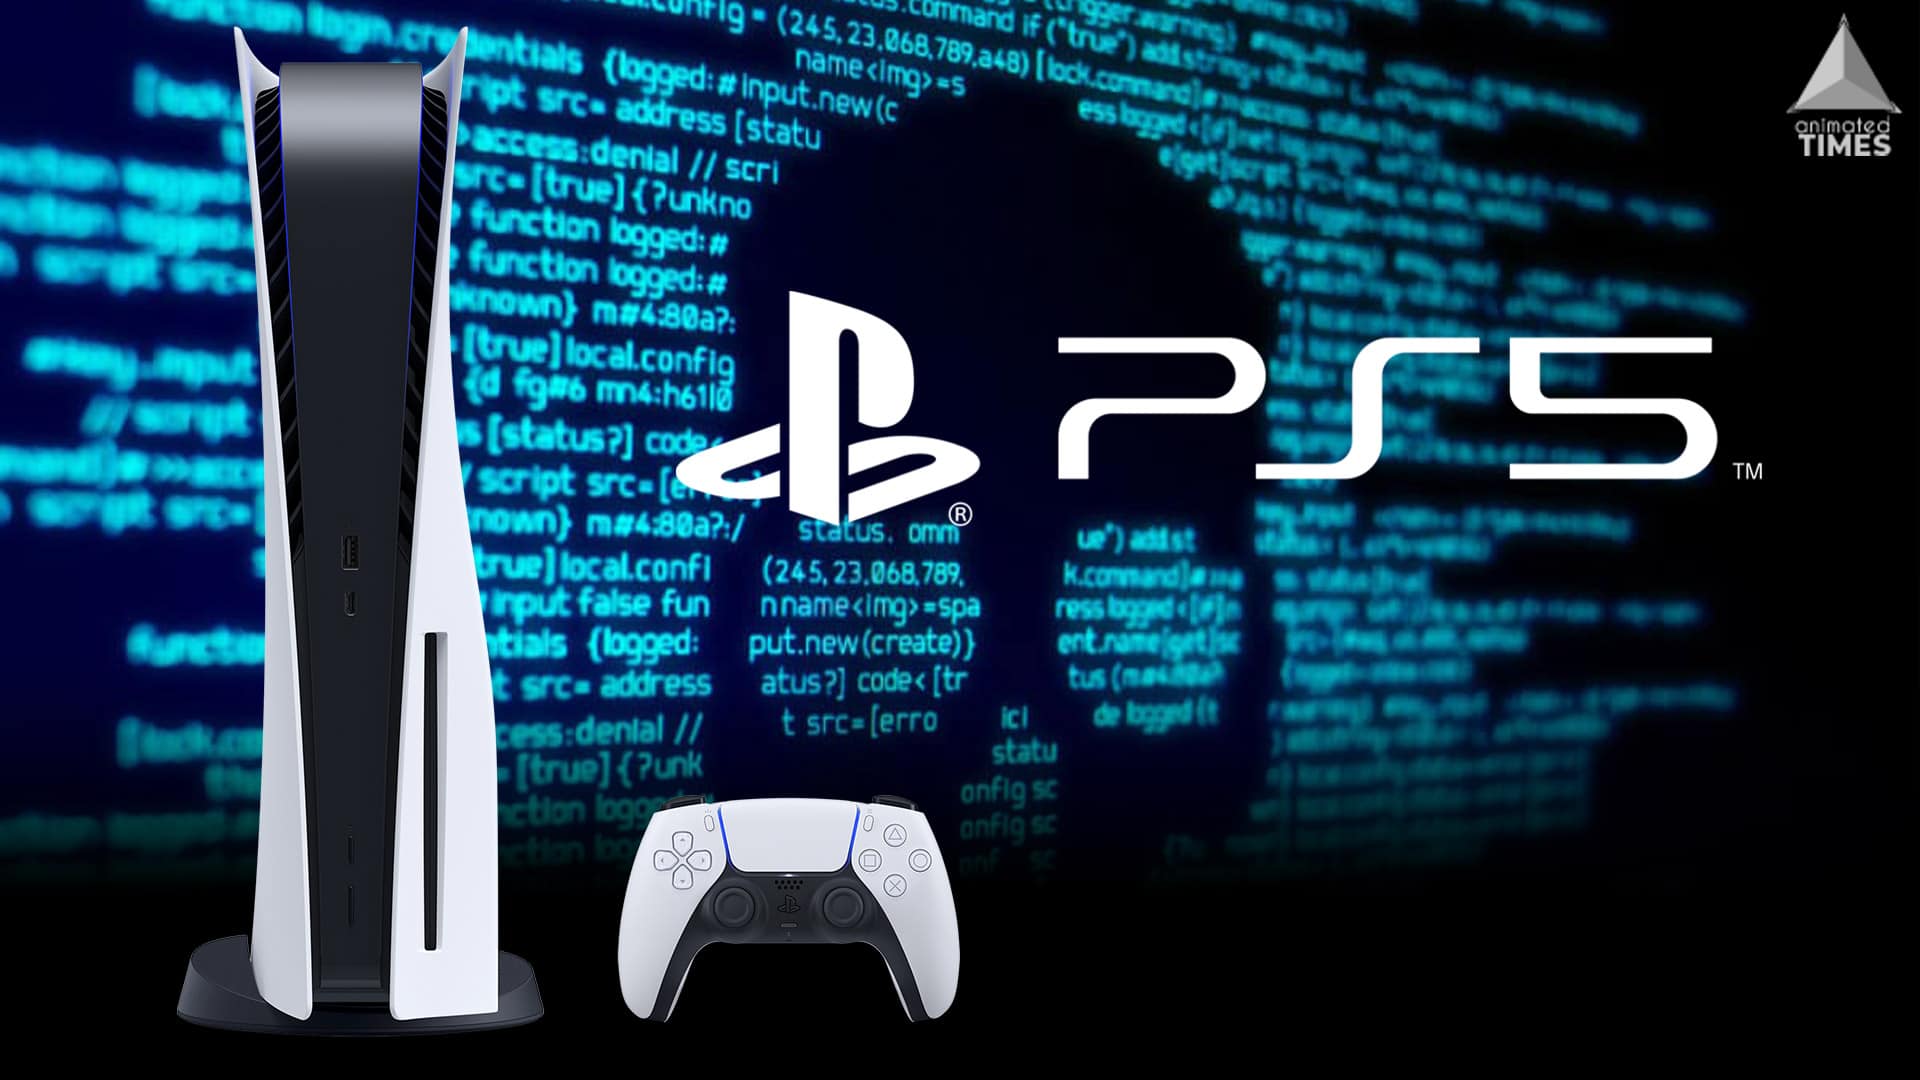 PS5: Potential Problems At Launch Based On Previous Console History